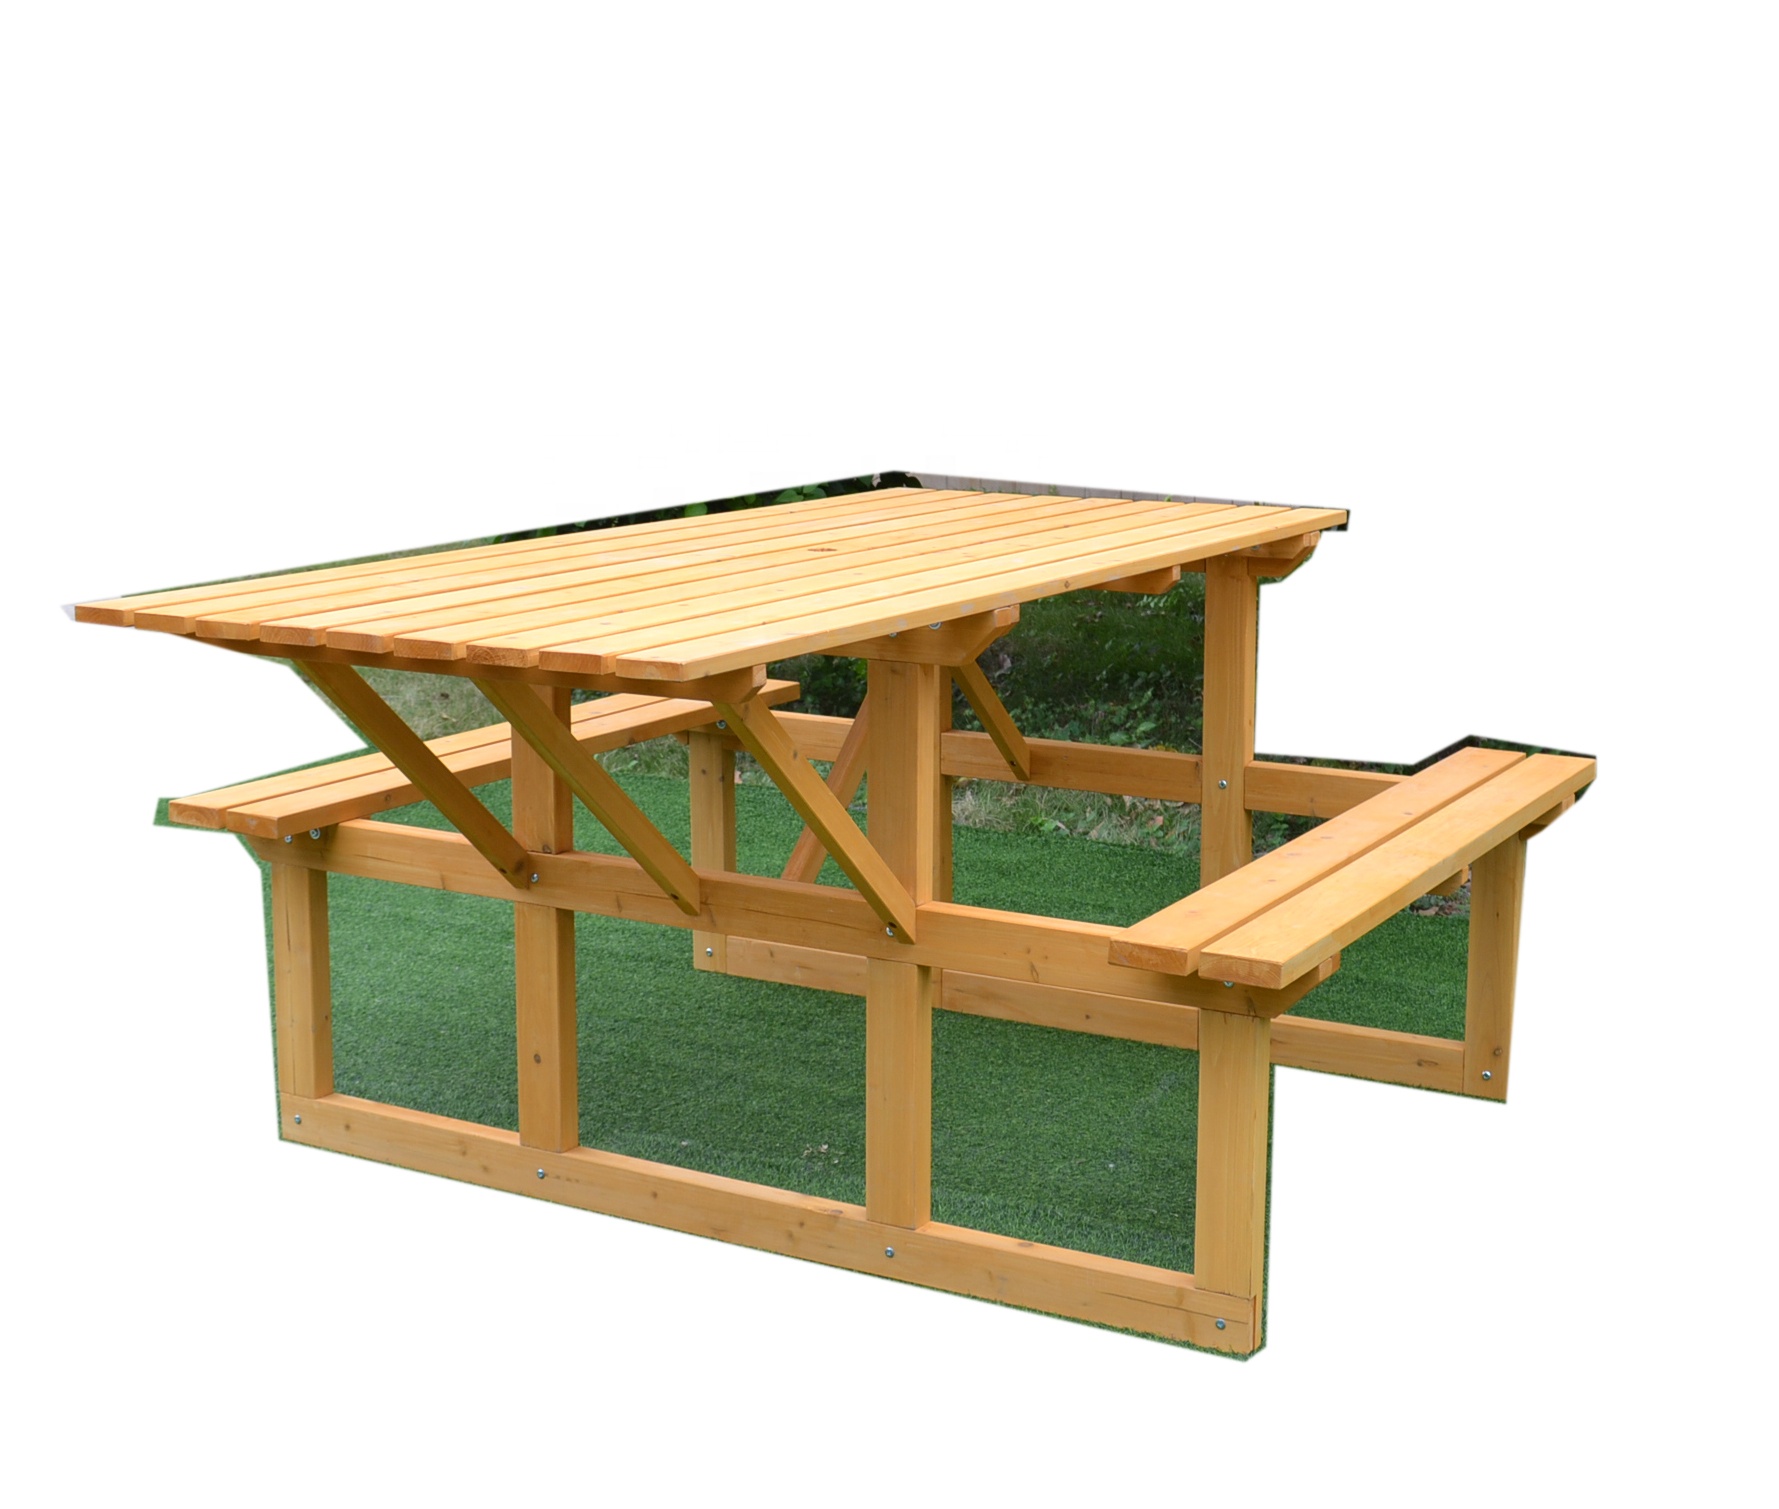 High quality Wholesale Folding Furniture Camping Patio Deck Lawn Beach Yar wooden outdoor garden picnic table bench chair